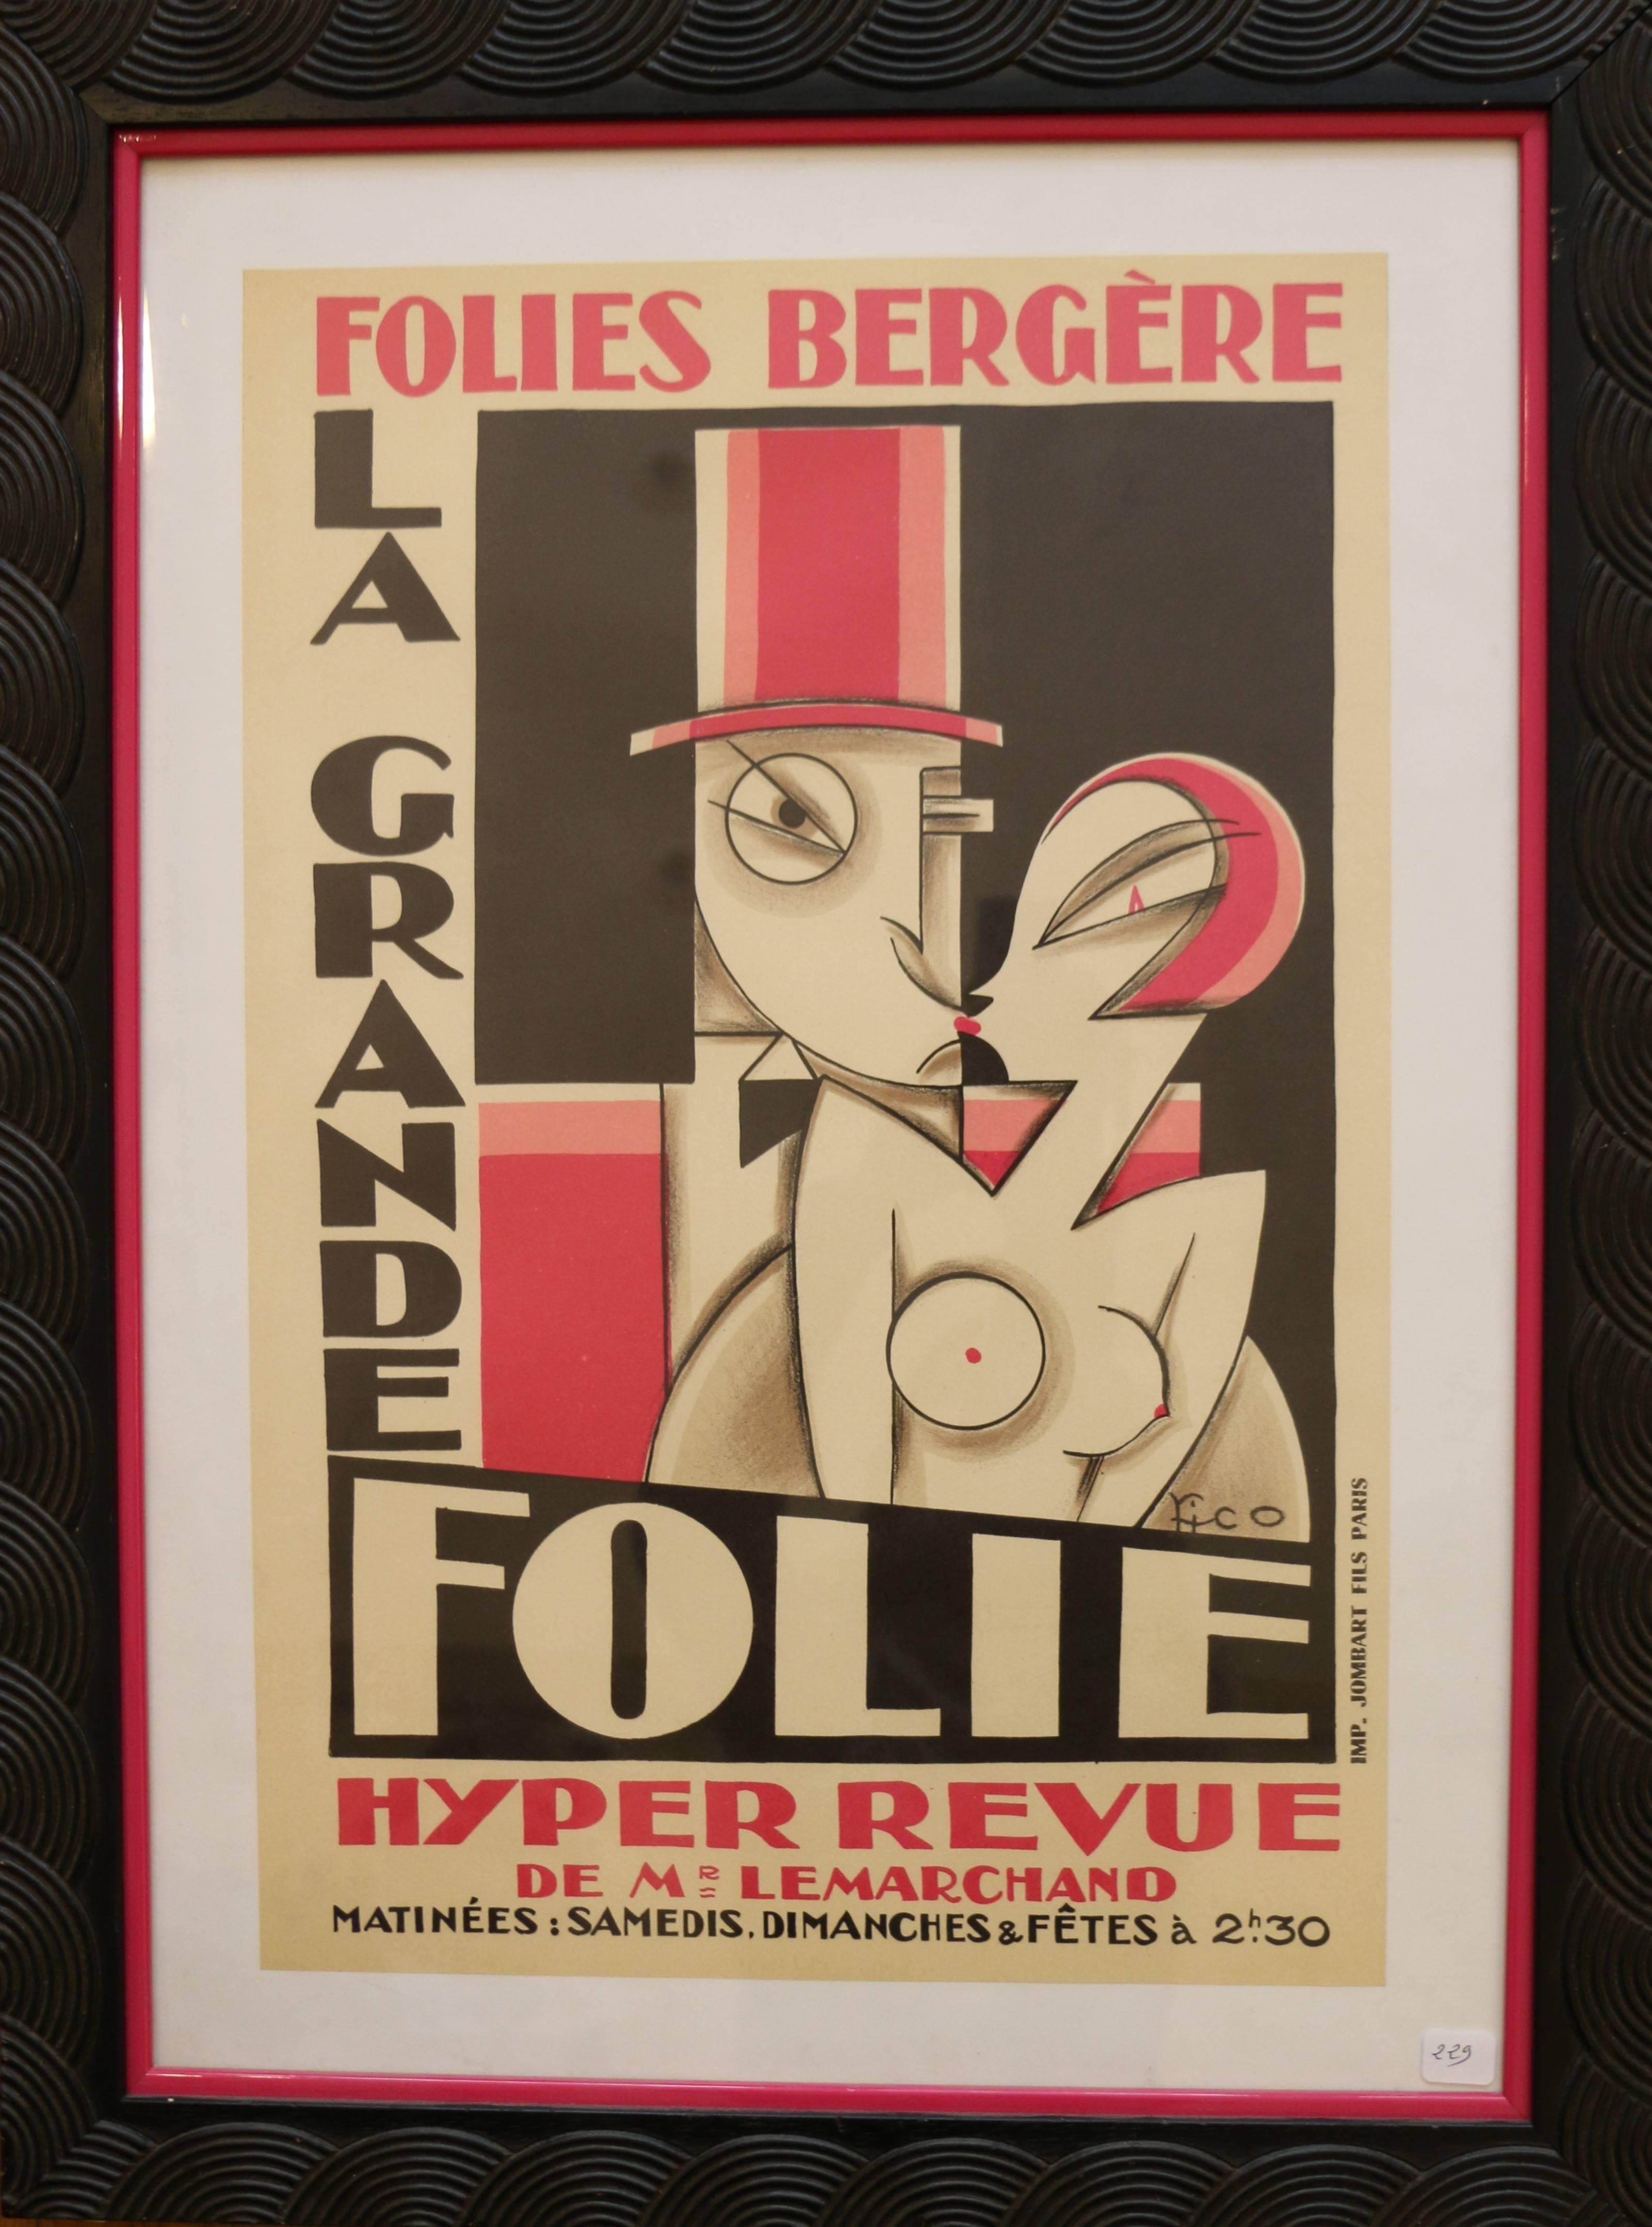 French Original and Rare Lithographic Poster by Pico, Art Deco, France, 1920s